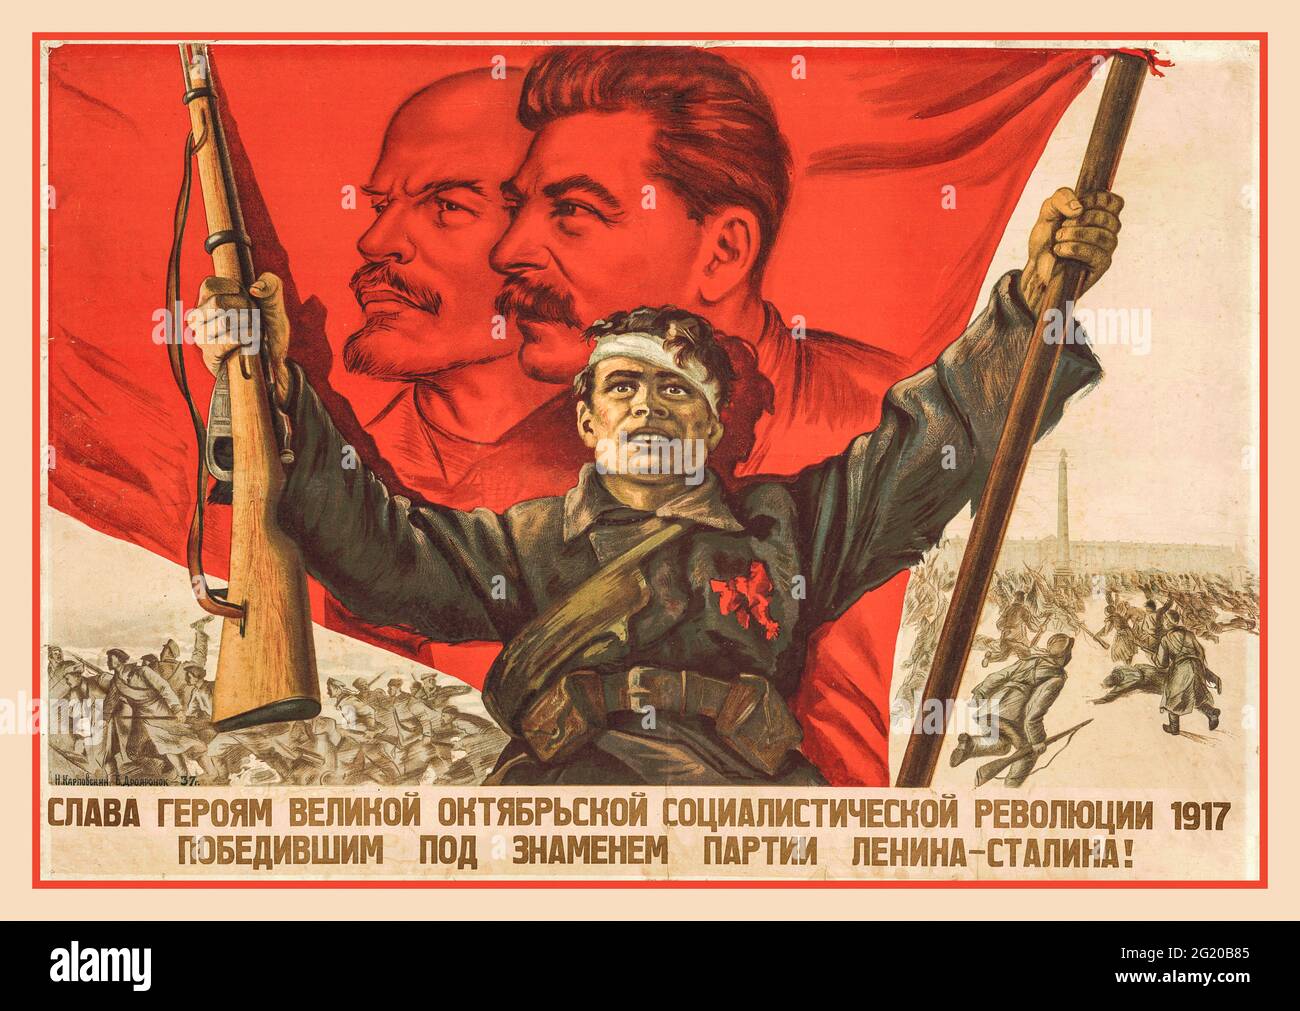 Glory to the heroes of the Great October Socialist Revolution of 1917, who won under the banner of the party of Lenin-Stalin! Hood. N. Karpovsky. OGIZ-IZOGIZ. M.-L., 1937 Stock Photo